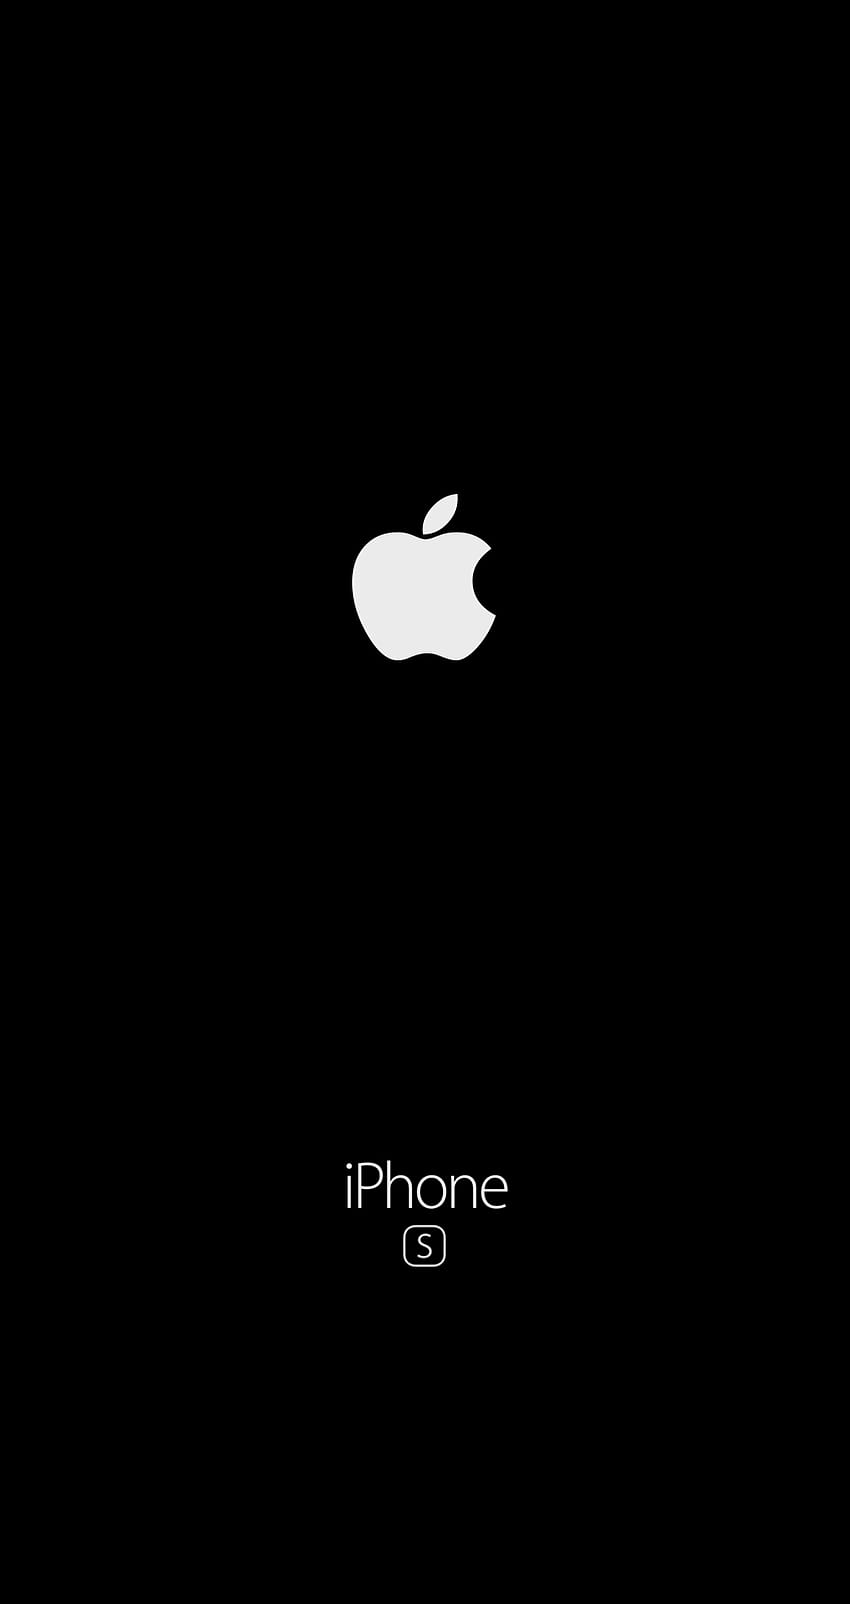 The iPhone is another form of digital literacy. I am, full of iphone 6s HD phone wallpaper